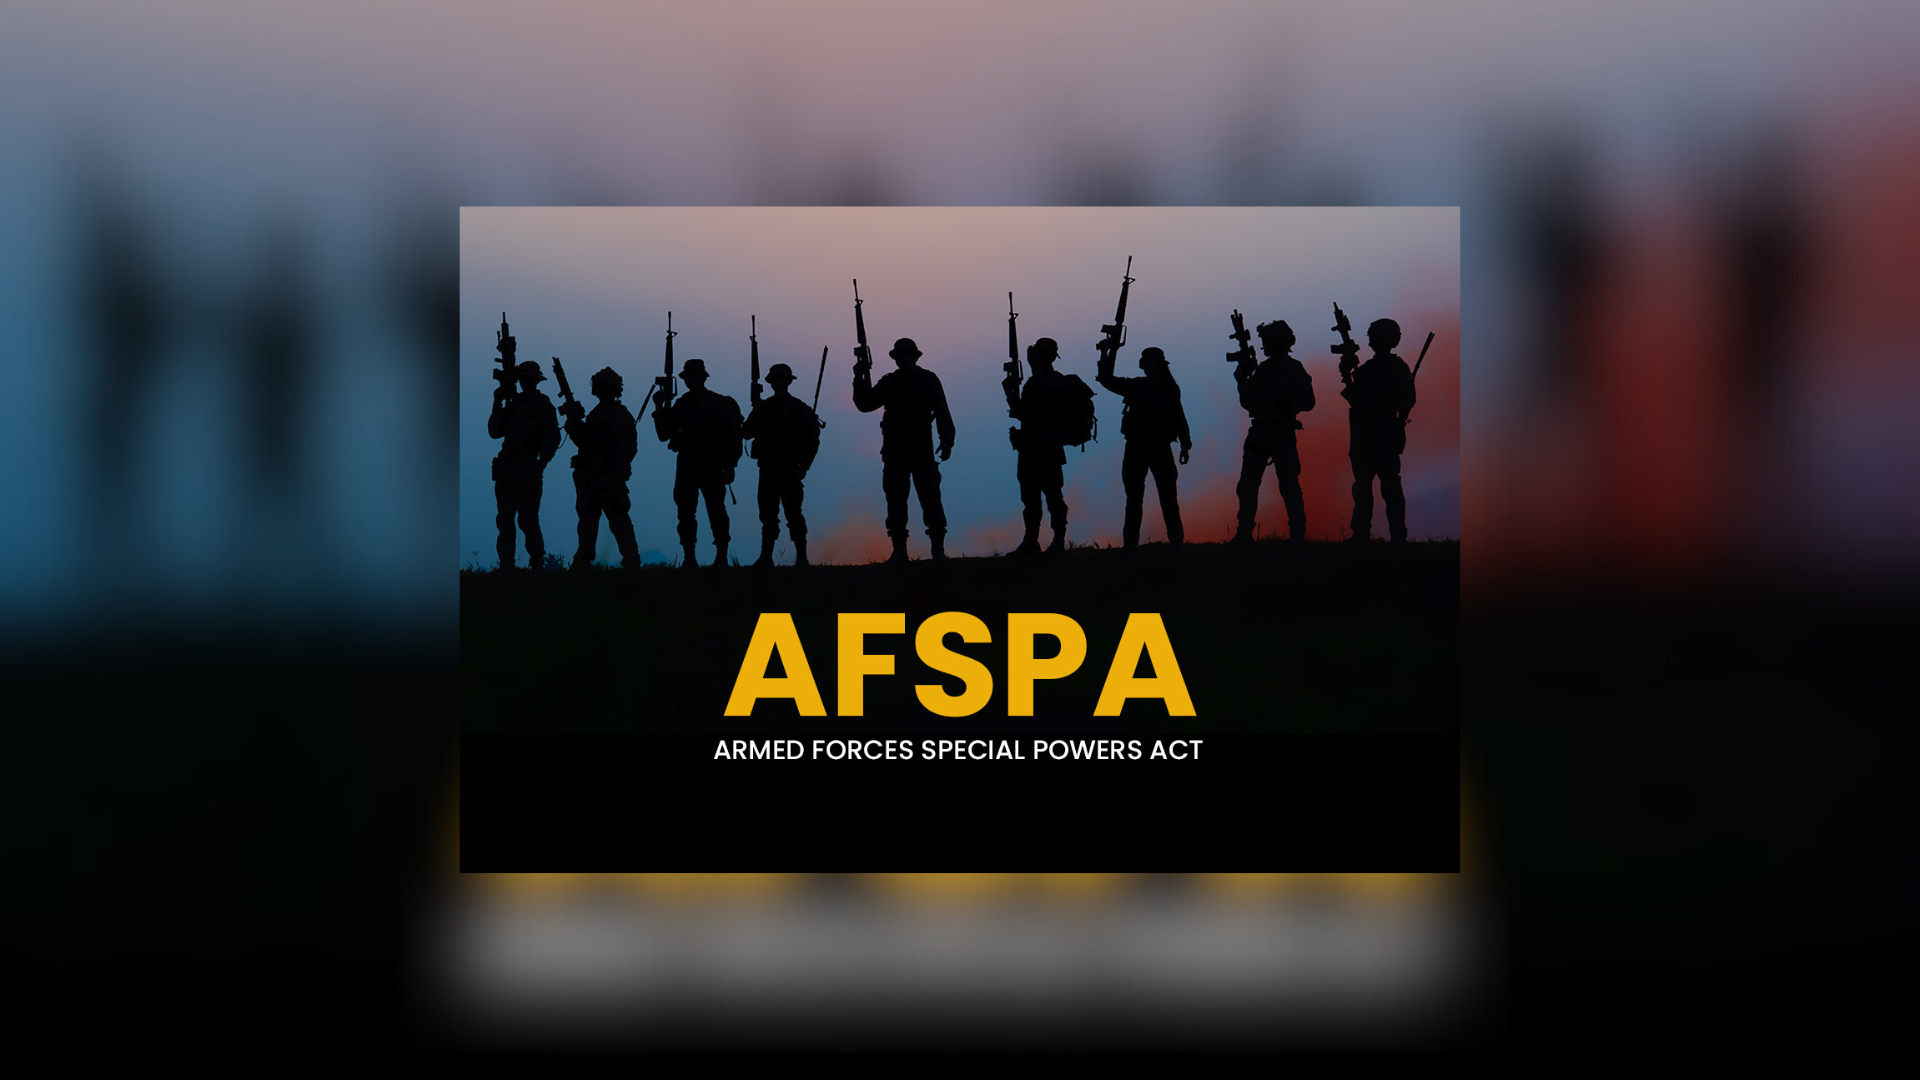 Central Government Extends AFSPA In Arunachal Pradesh: 3 Districts, 3 Police Stations Covered For 6 Months